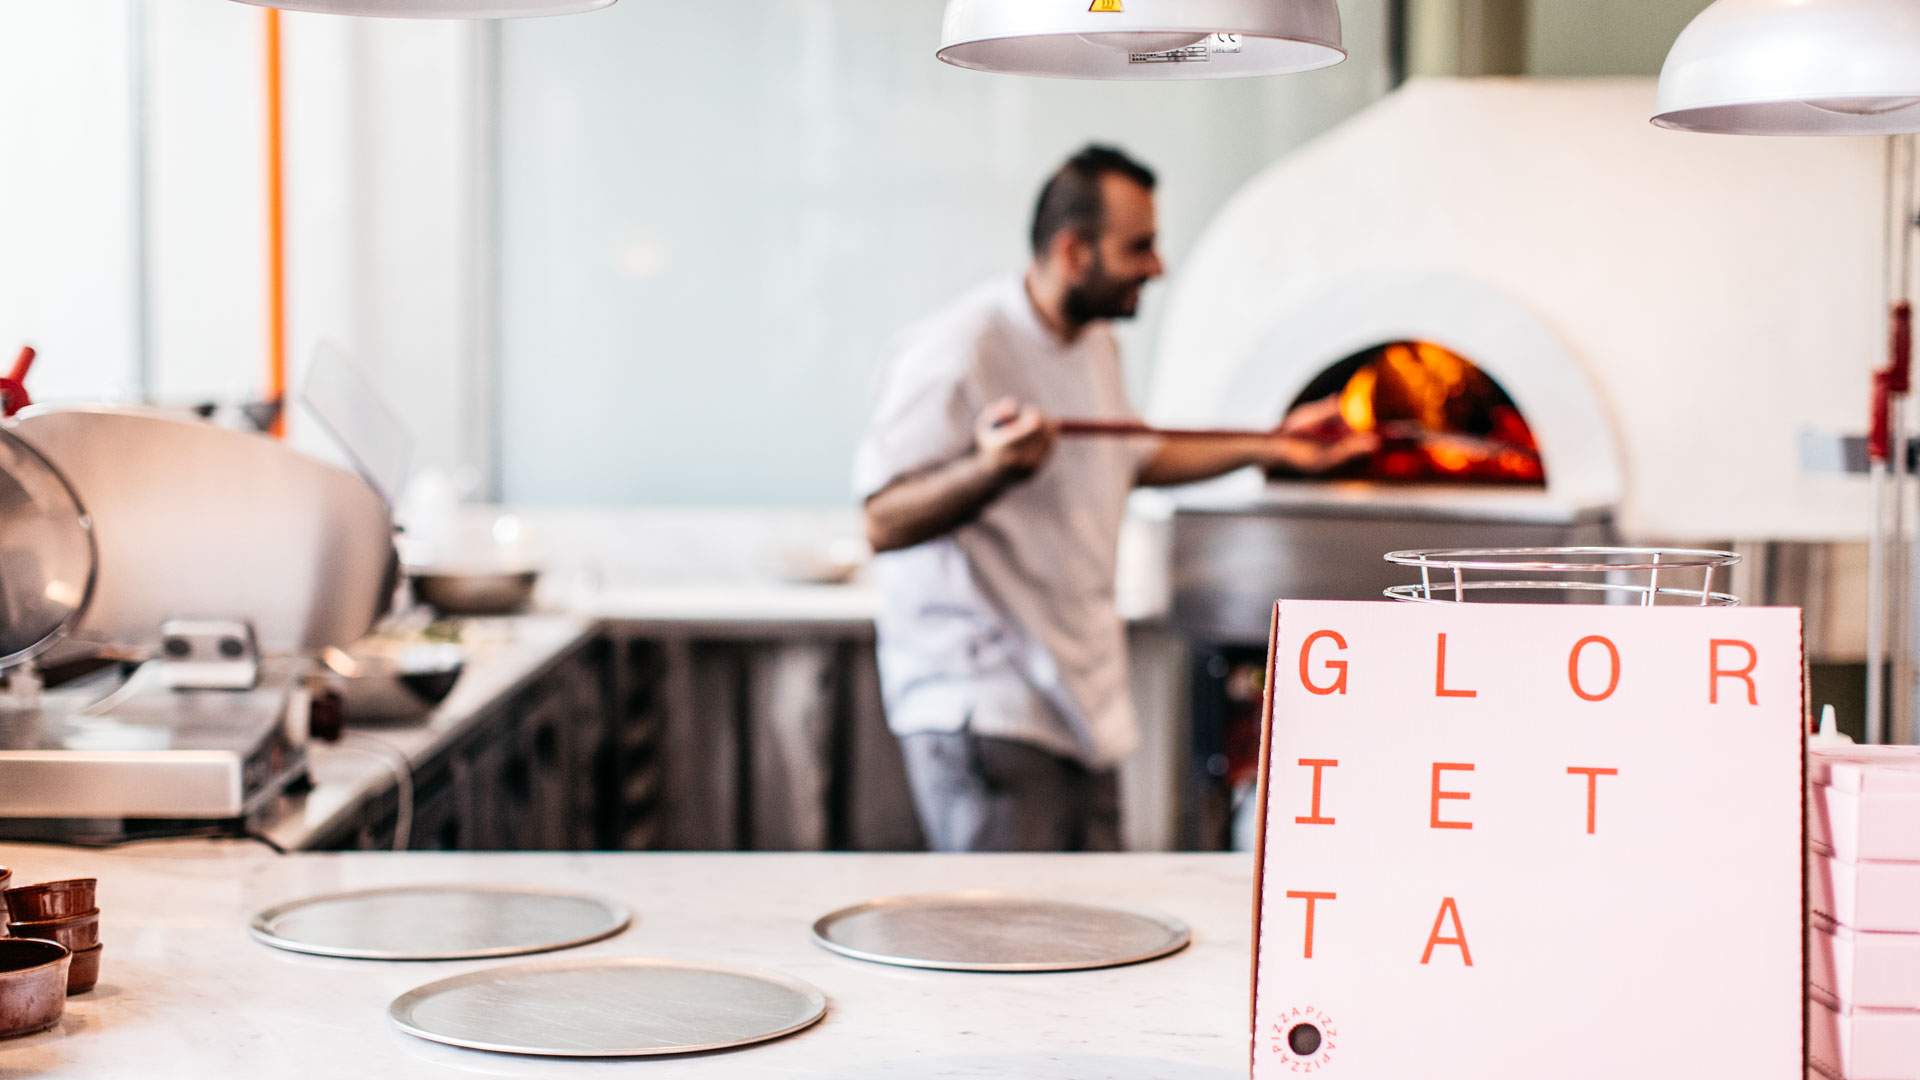 Glorietta Is North Sydney's New Italian Eatery with a Sunny Courtyard and Lots of Burrata